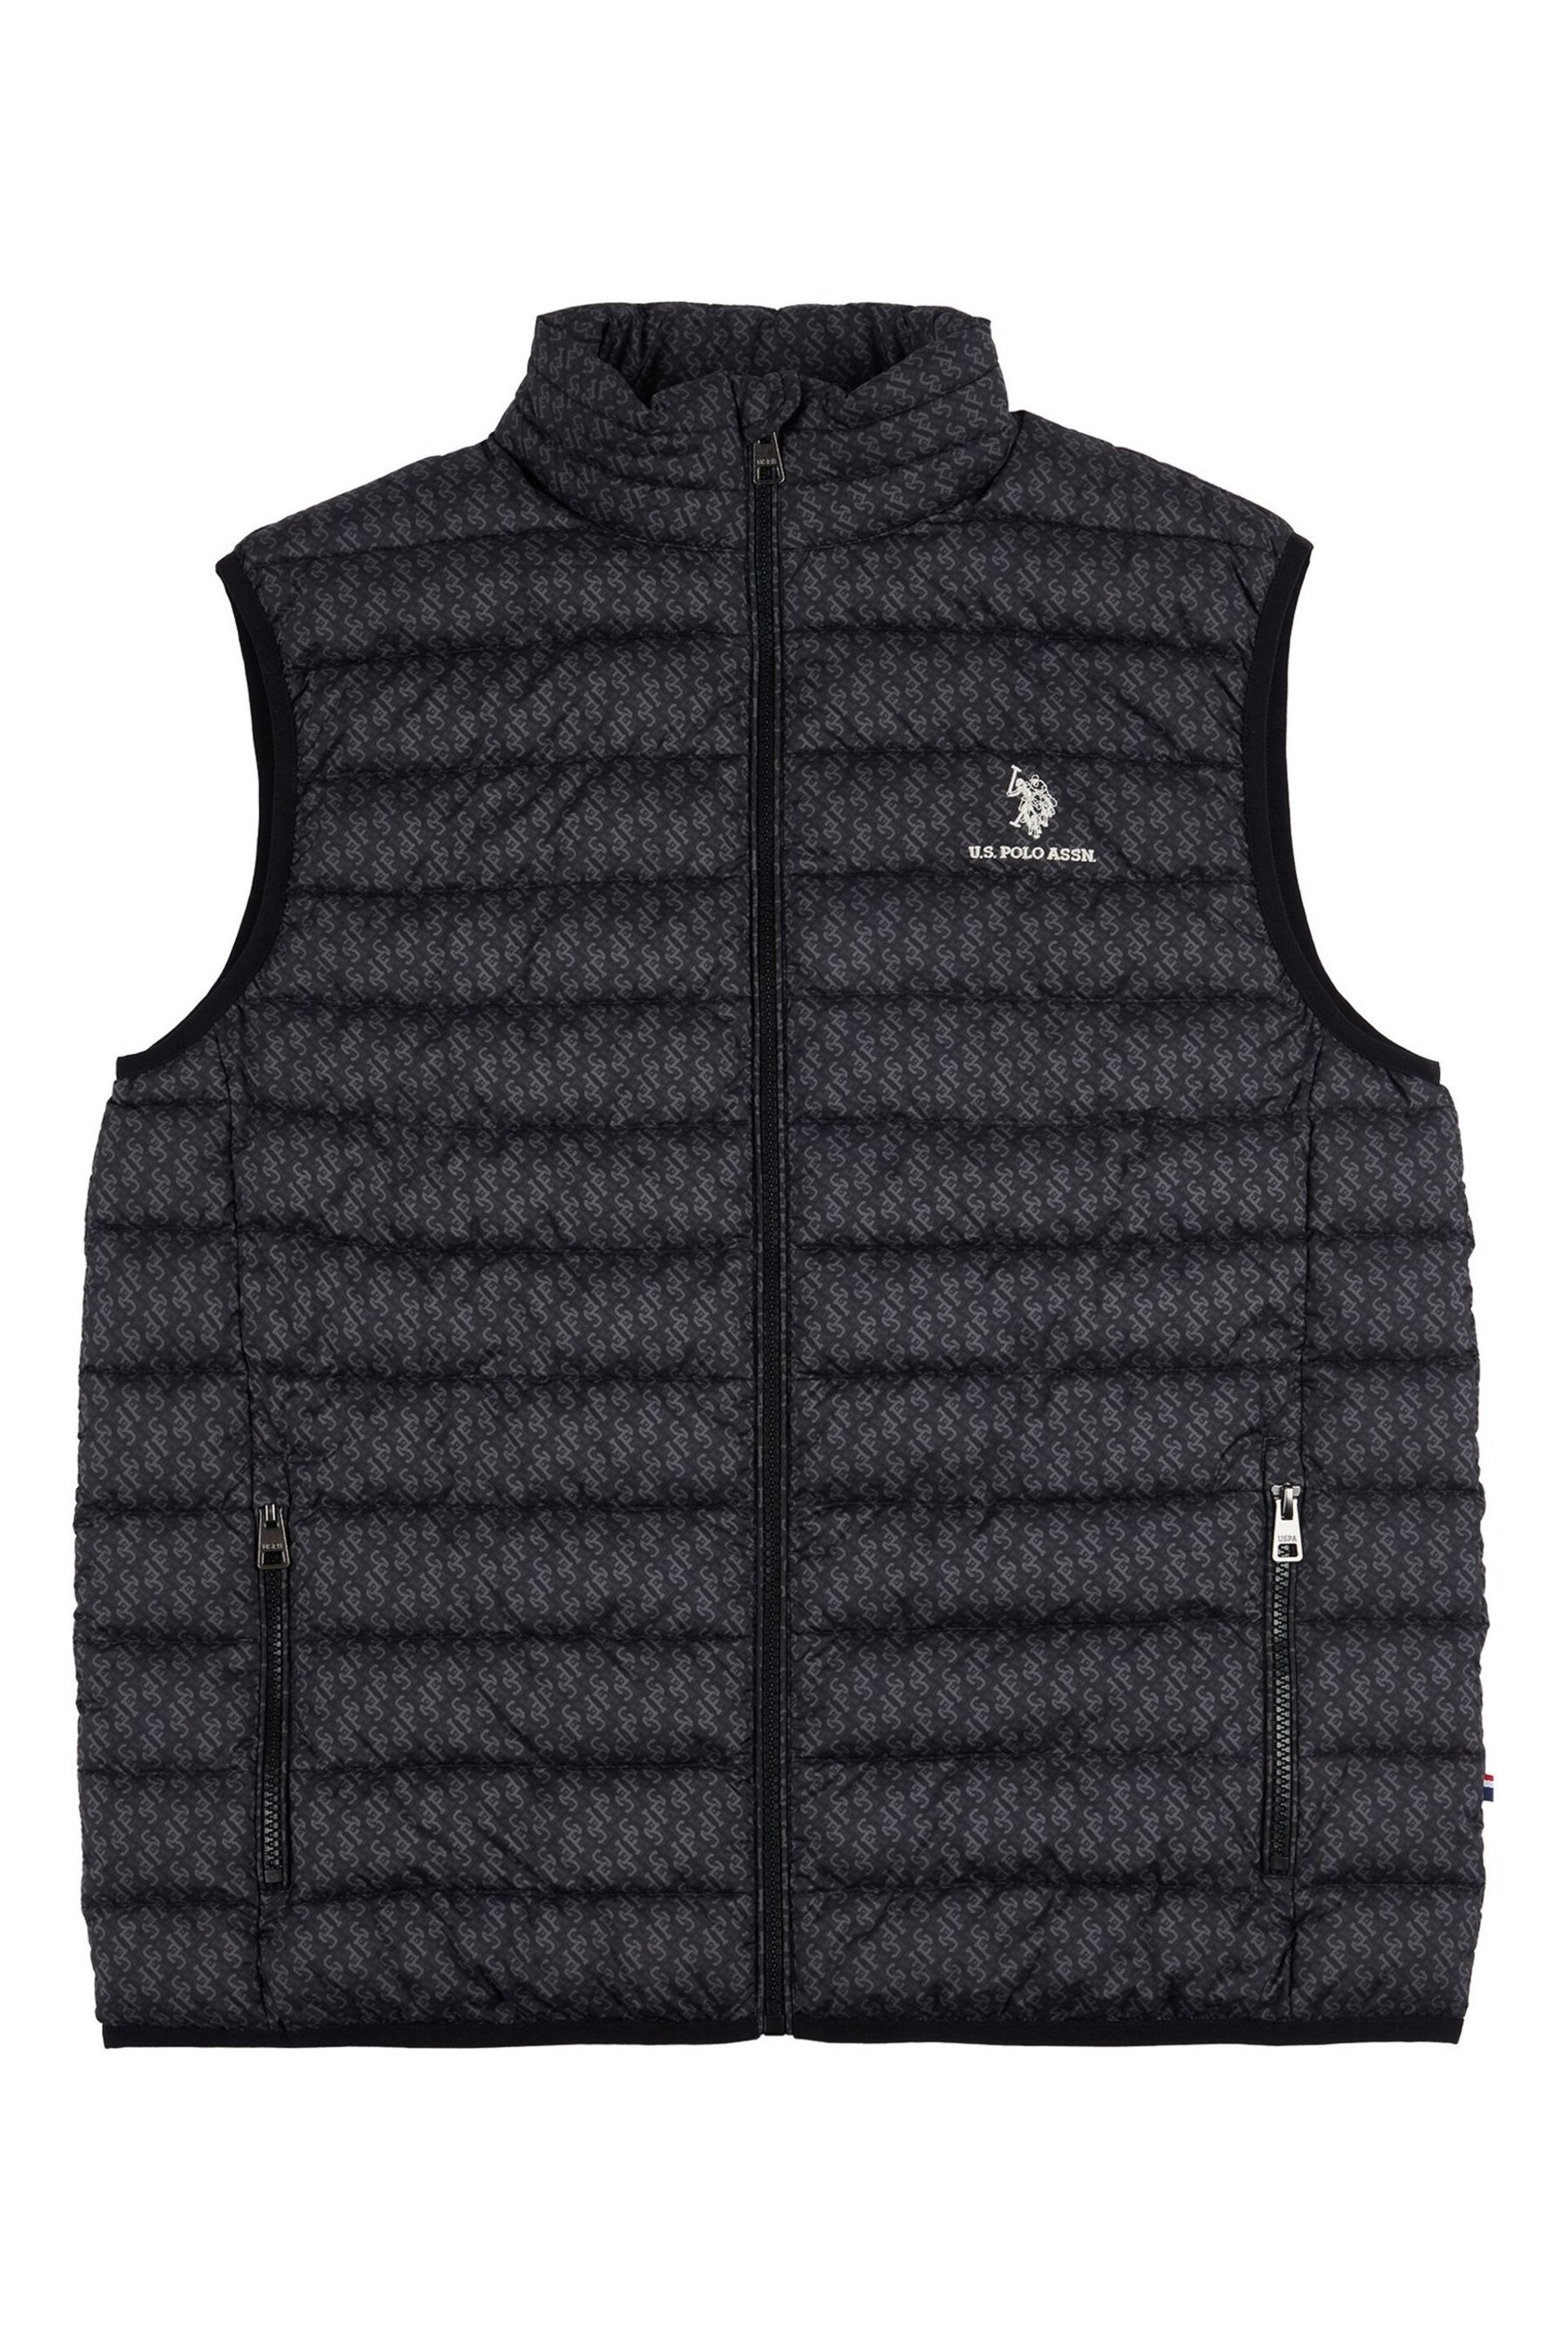 U.S. Polo Assn. Mens Monogram Quilted Black Gilet - Image 5 of 7